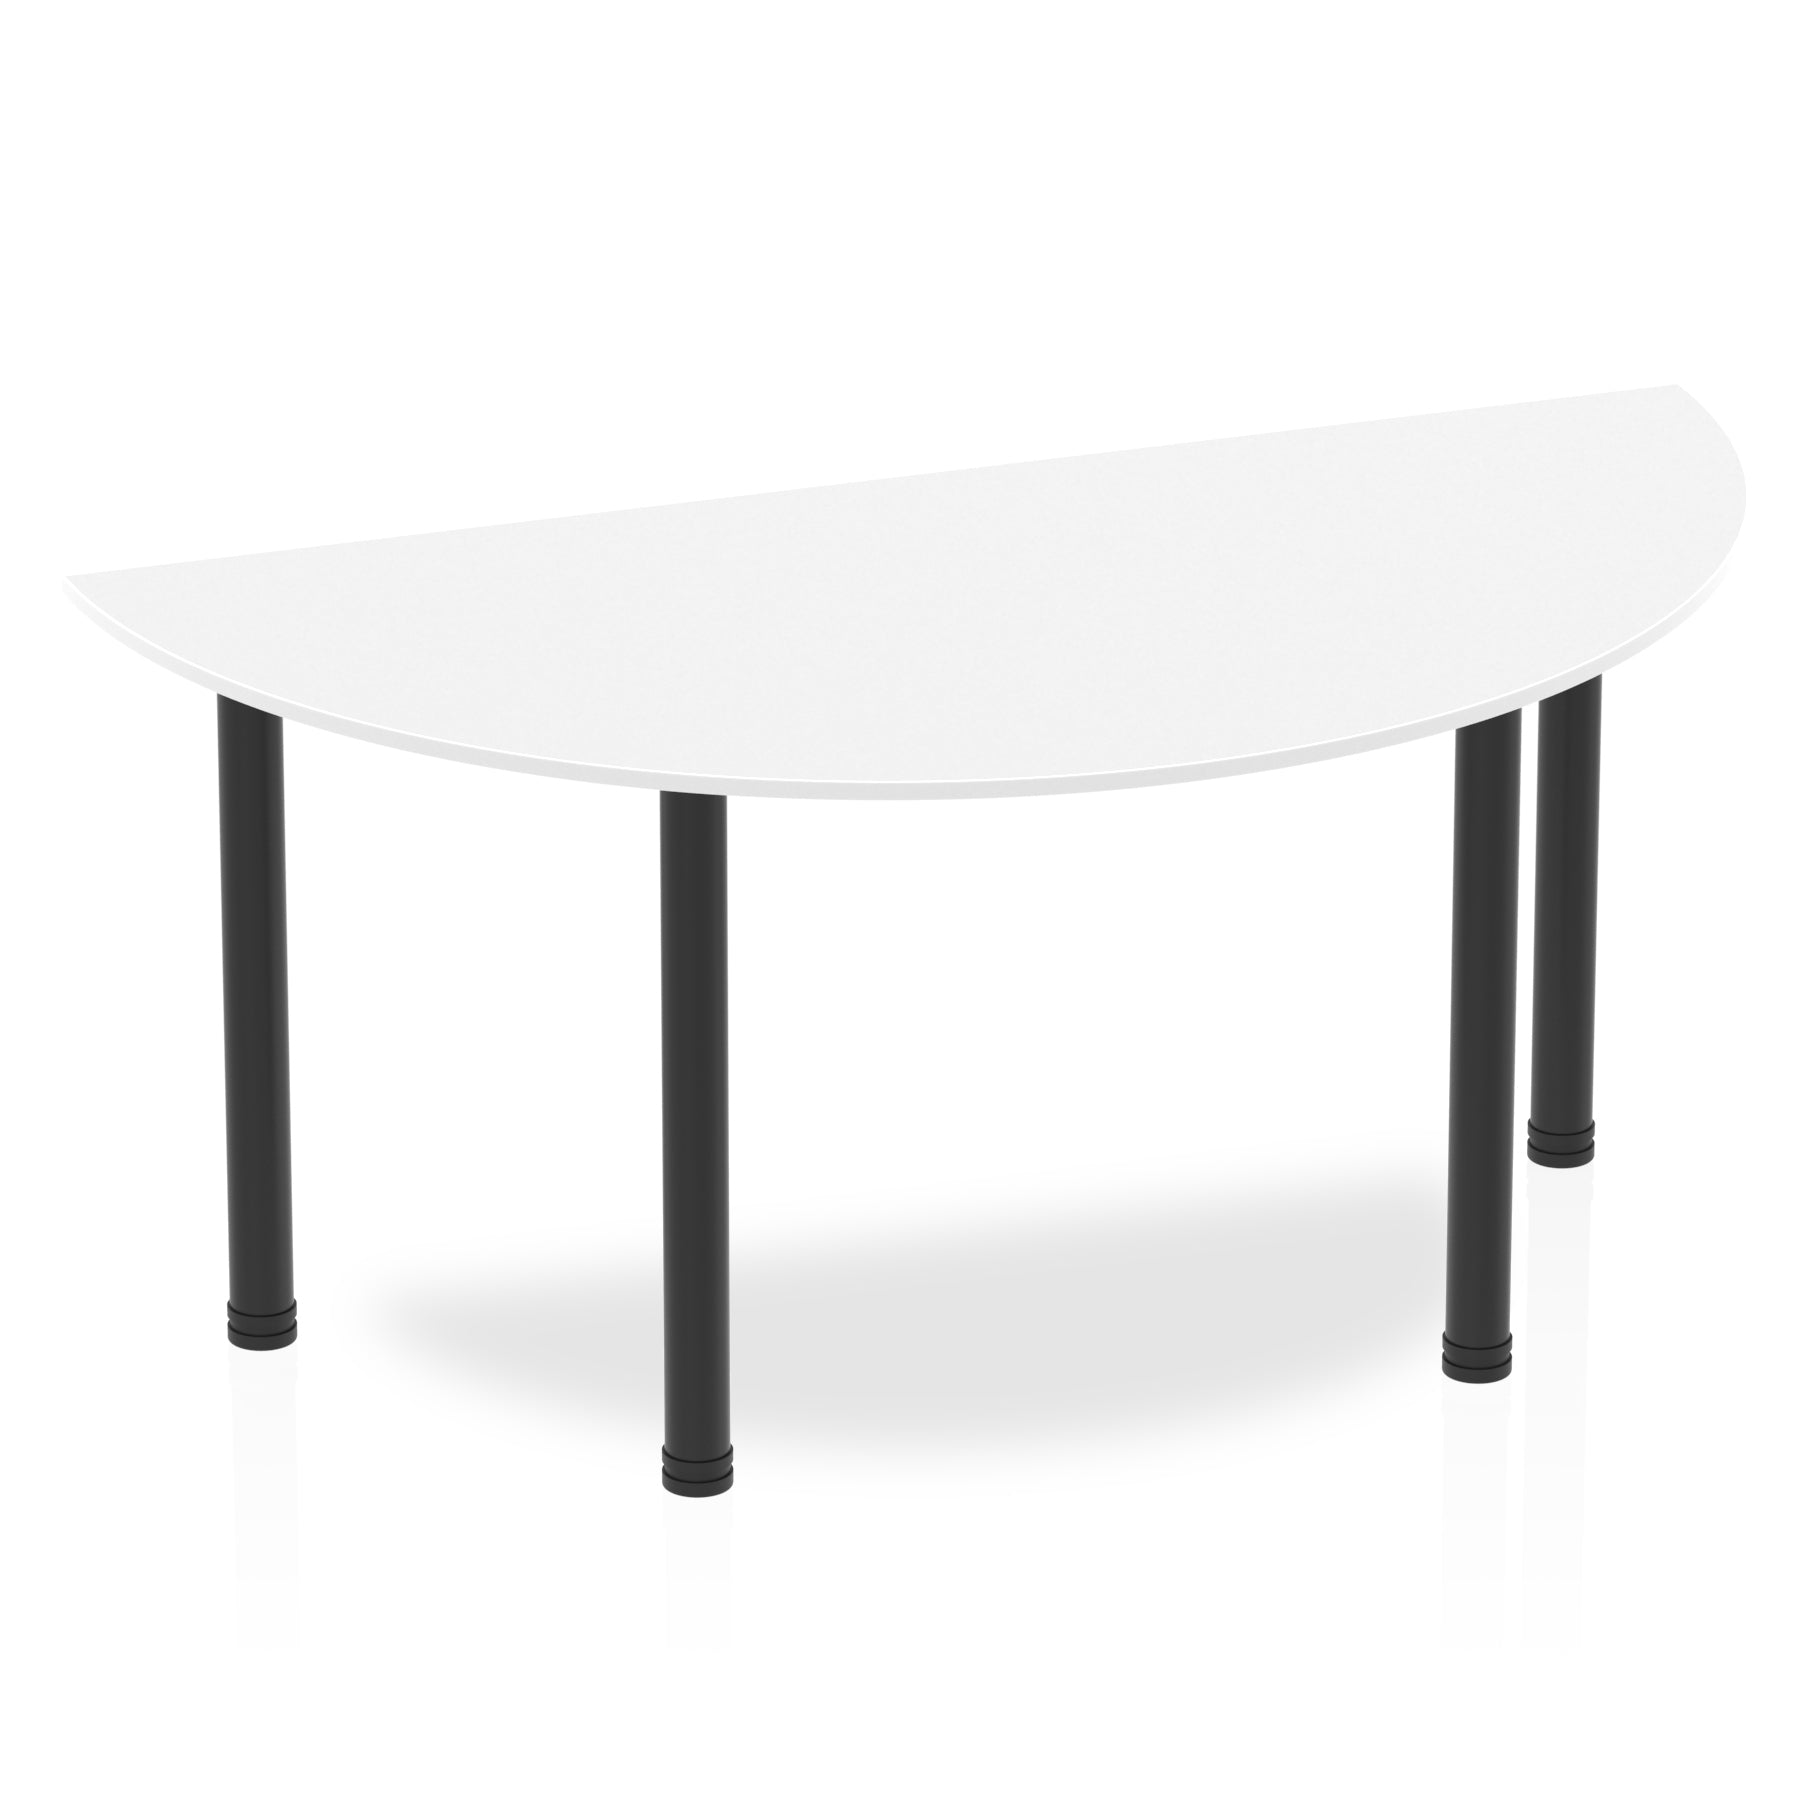 Impulse Semi-Circle Table 1600x800mm with Post Leg - MFC Material, 5-Year Guarantee, Self-Assembly, Multiple Frame Colours